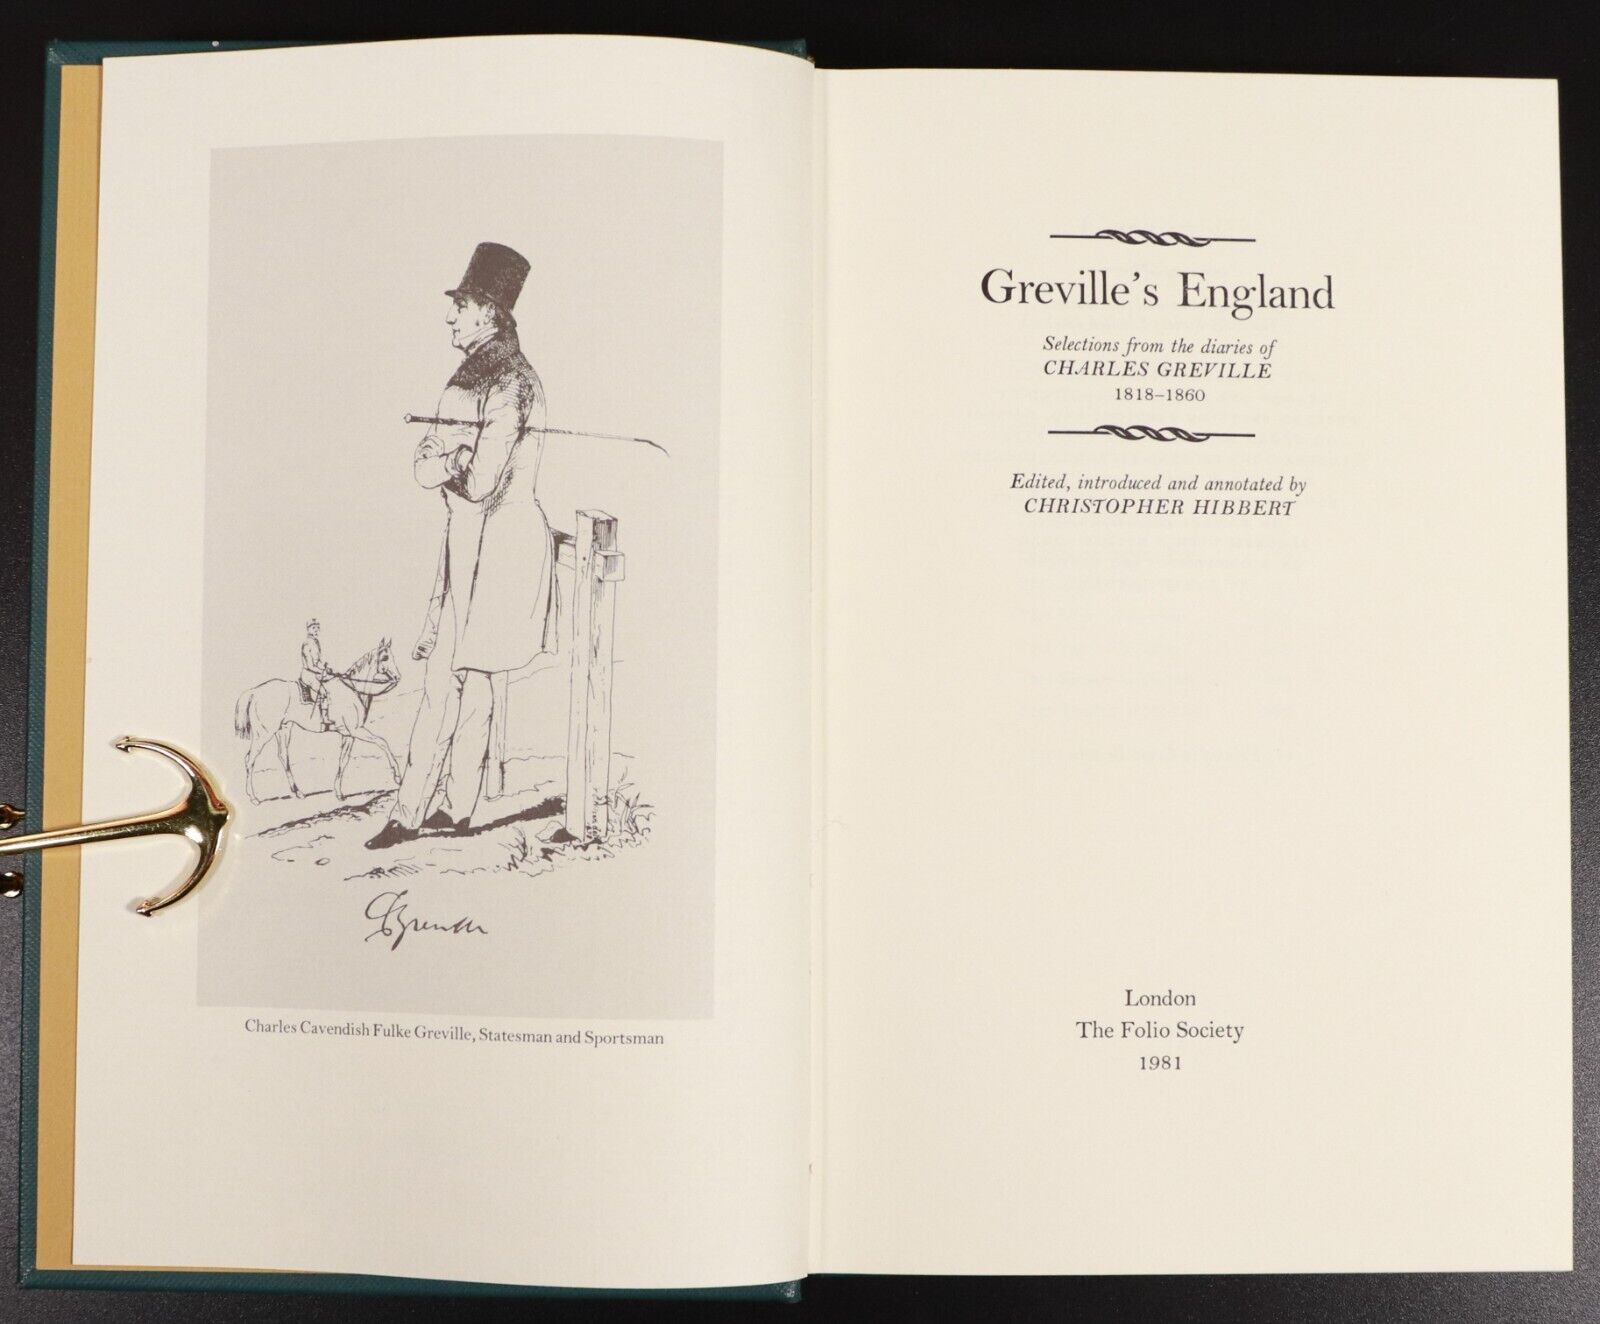 1981 Greville's England Diaries Of Charles Greville Folio Society History Book - 0